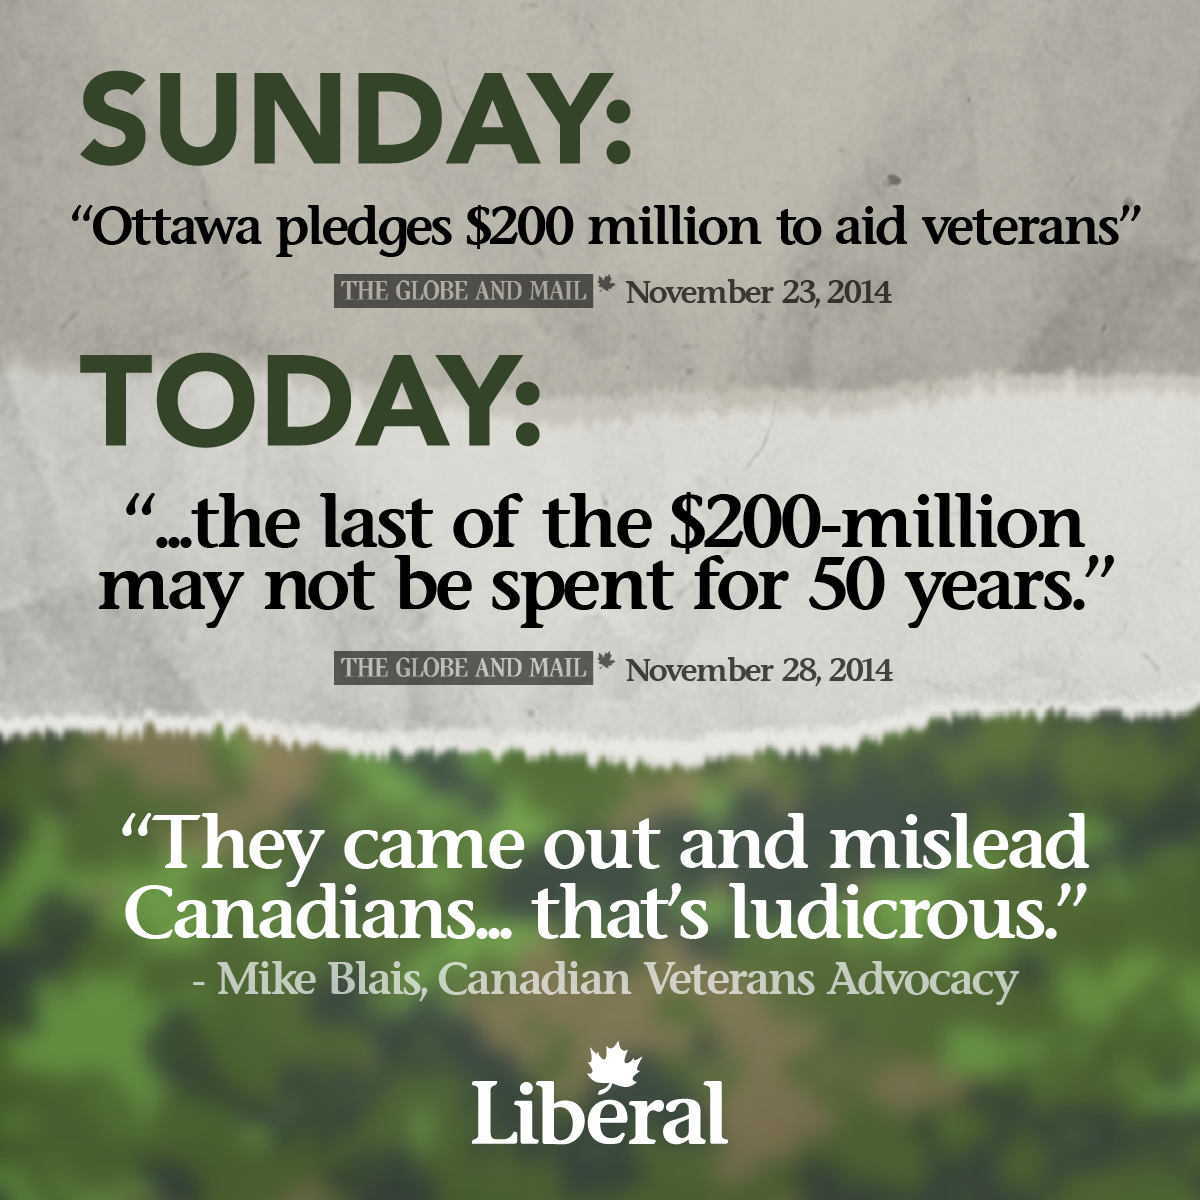 Sunday: "Ottawa pledges $200 million to aid veterans. " - The Globe and Mail, November 23, 2014. Today: "...the last of the $200-million may not be spent for fifty years." - The Globe and Mail, November 28, 2014.  "They came out and mislead Canadians... That's ludicrous." Mike Blais, Canadian Veterans Advocacy